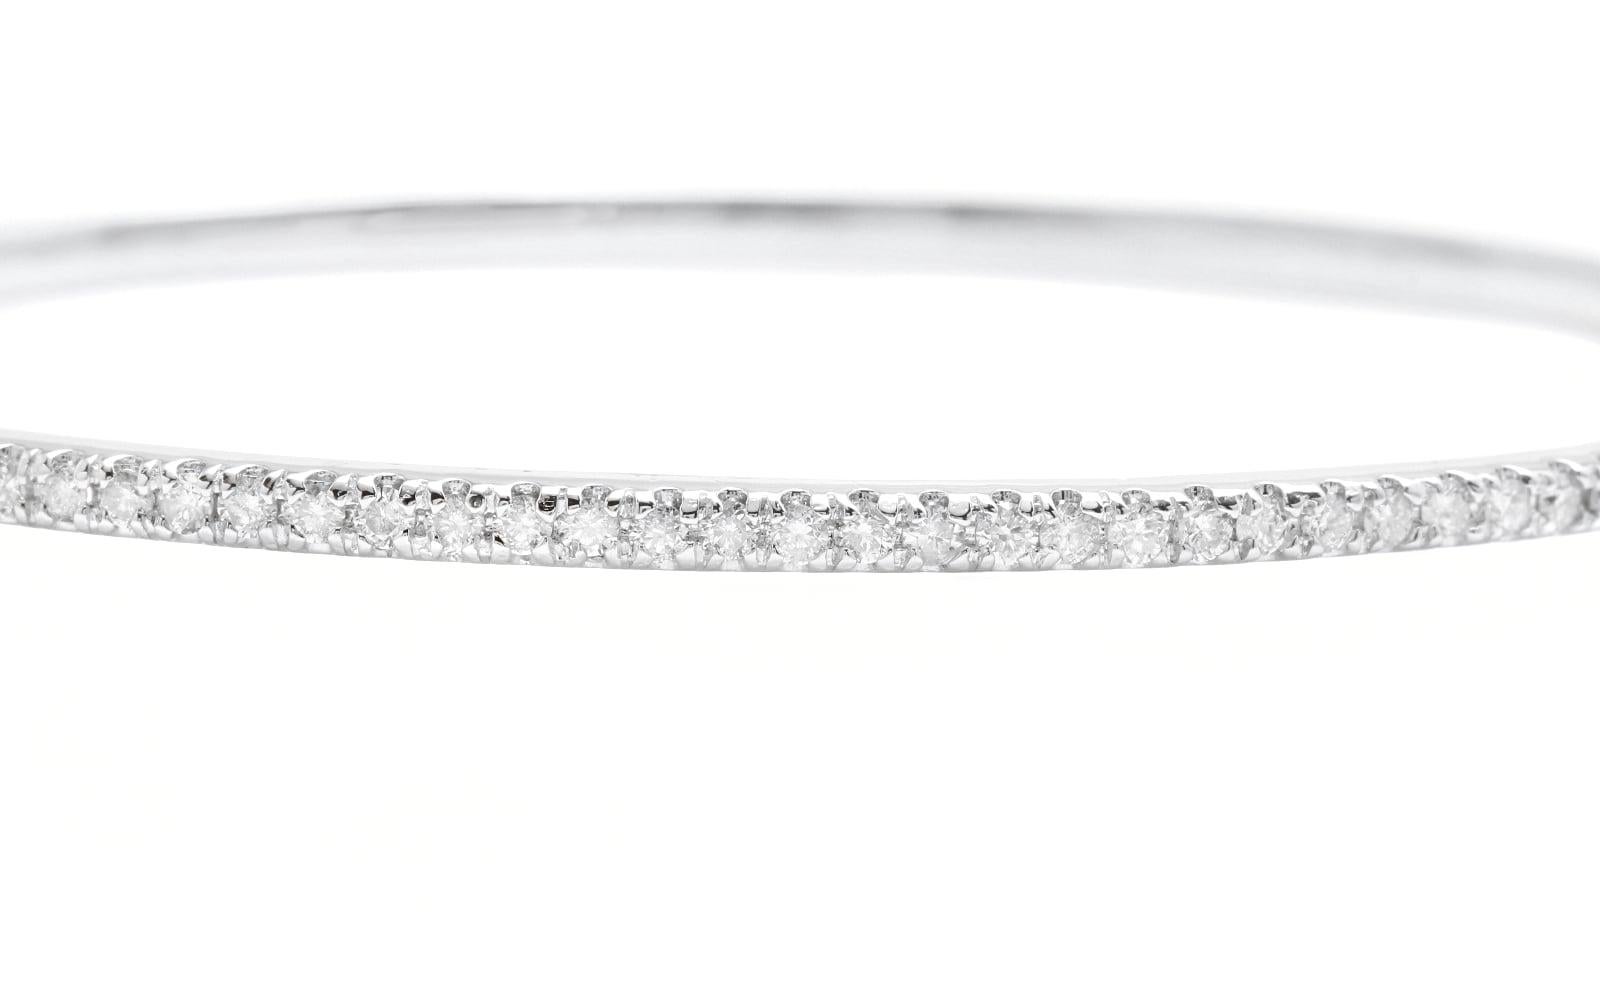 Very Impressive 0.80 Carats Natural Diamond 14K Solid White Gold Bangle Bracelet 

Suggested Replacement Value: Approx. $6,000.00

STAMPED: 14K

Total Natural Round Diamonds Weight: Approx. 0.80 Carats (color G-H / Clarity SI1-SI2)

Bangle Wrist